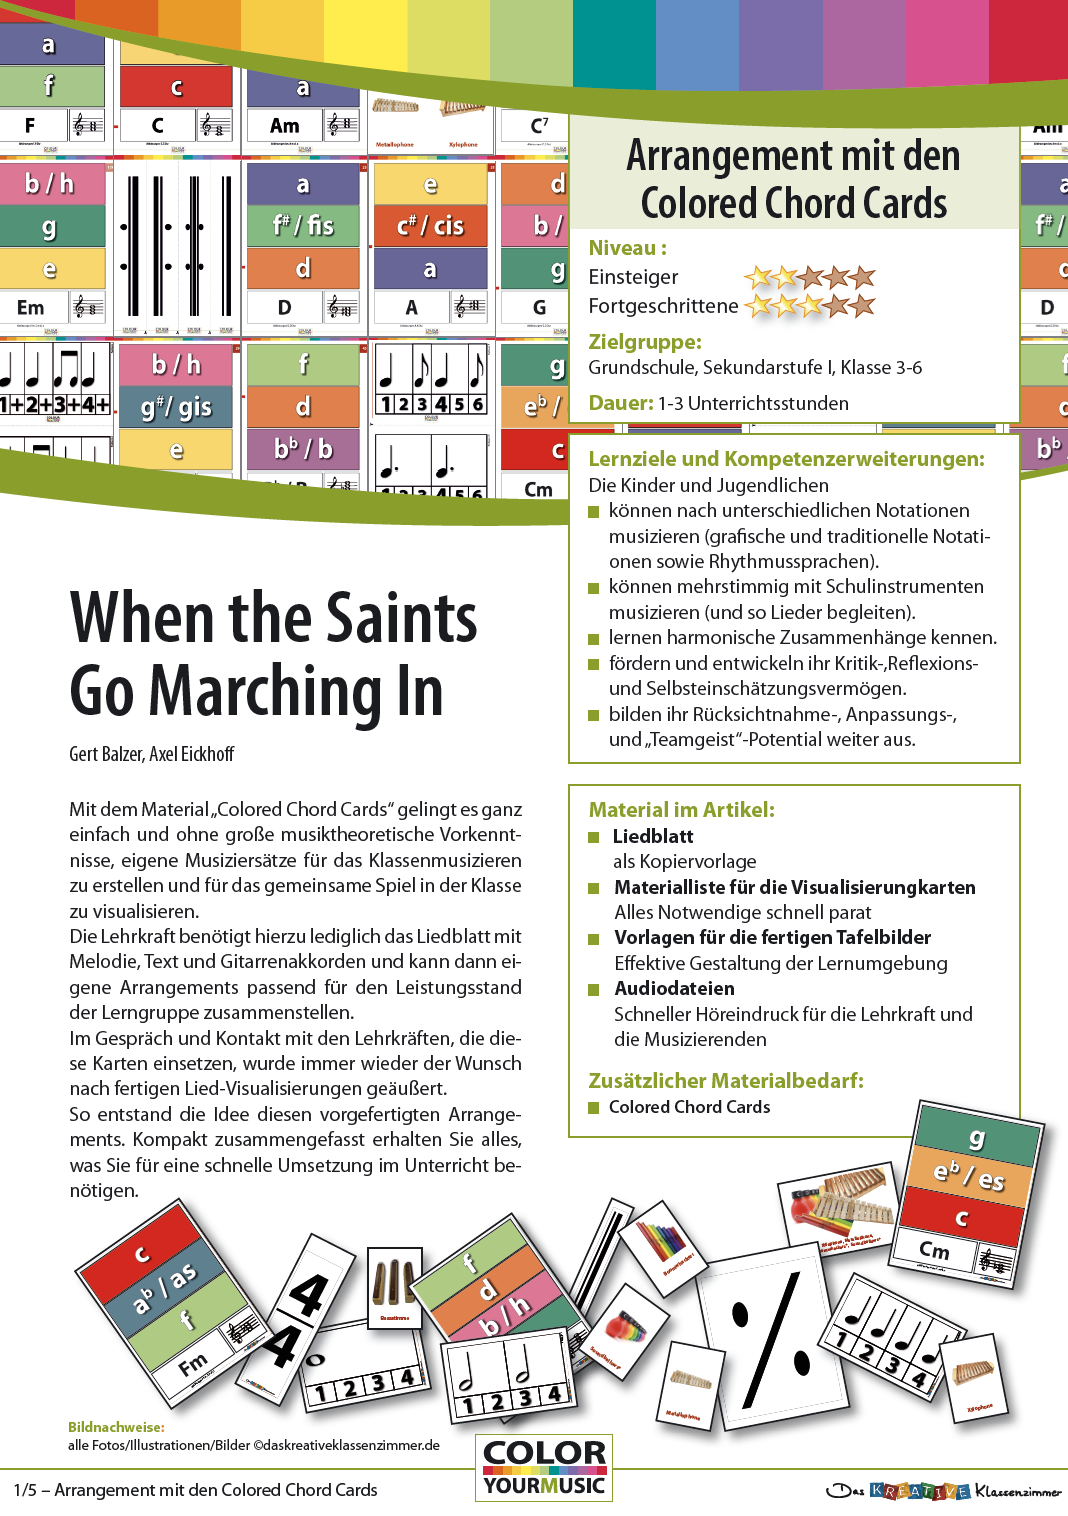 When the Saints - Colored Chord Cards